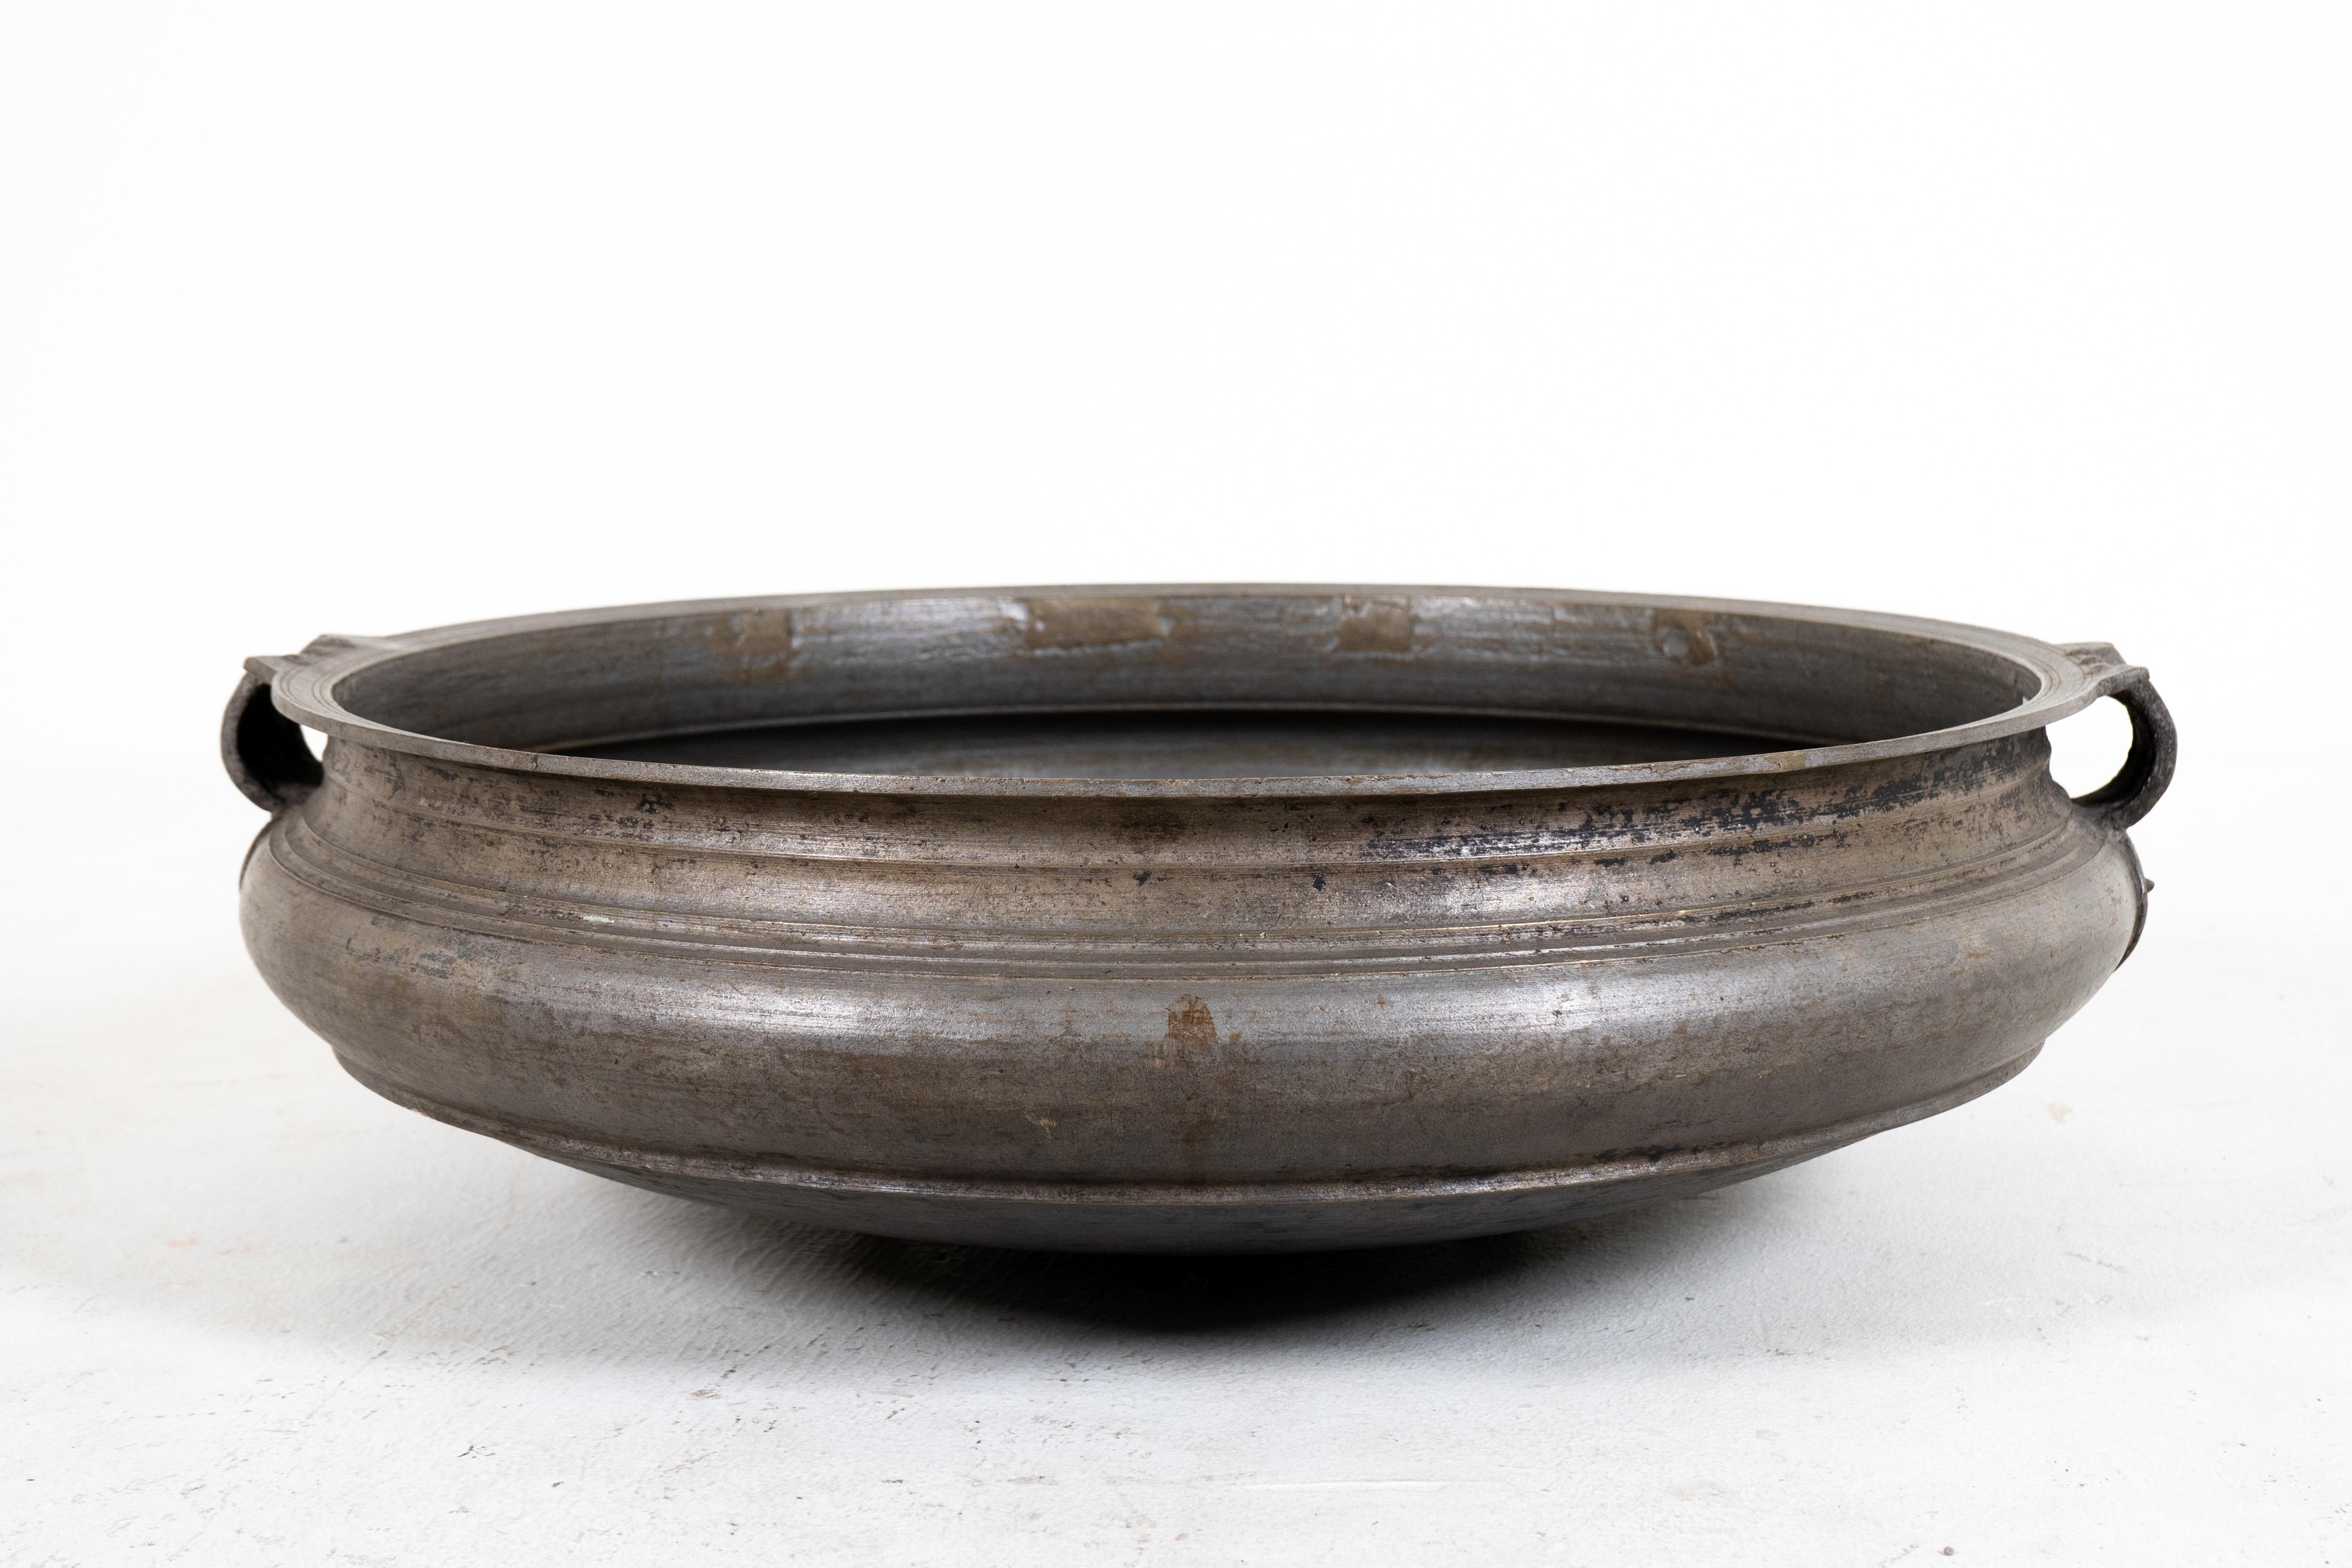 This shallow bronze bowl is an open fire cooking vessel known as urli or uruli, used throughout southern India for preparing ayurvedic medicines and cooking large quantities of food for gatherings and ritual offerings. Cast of bell bronze using the